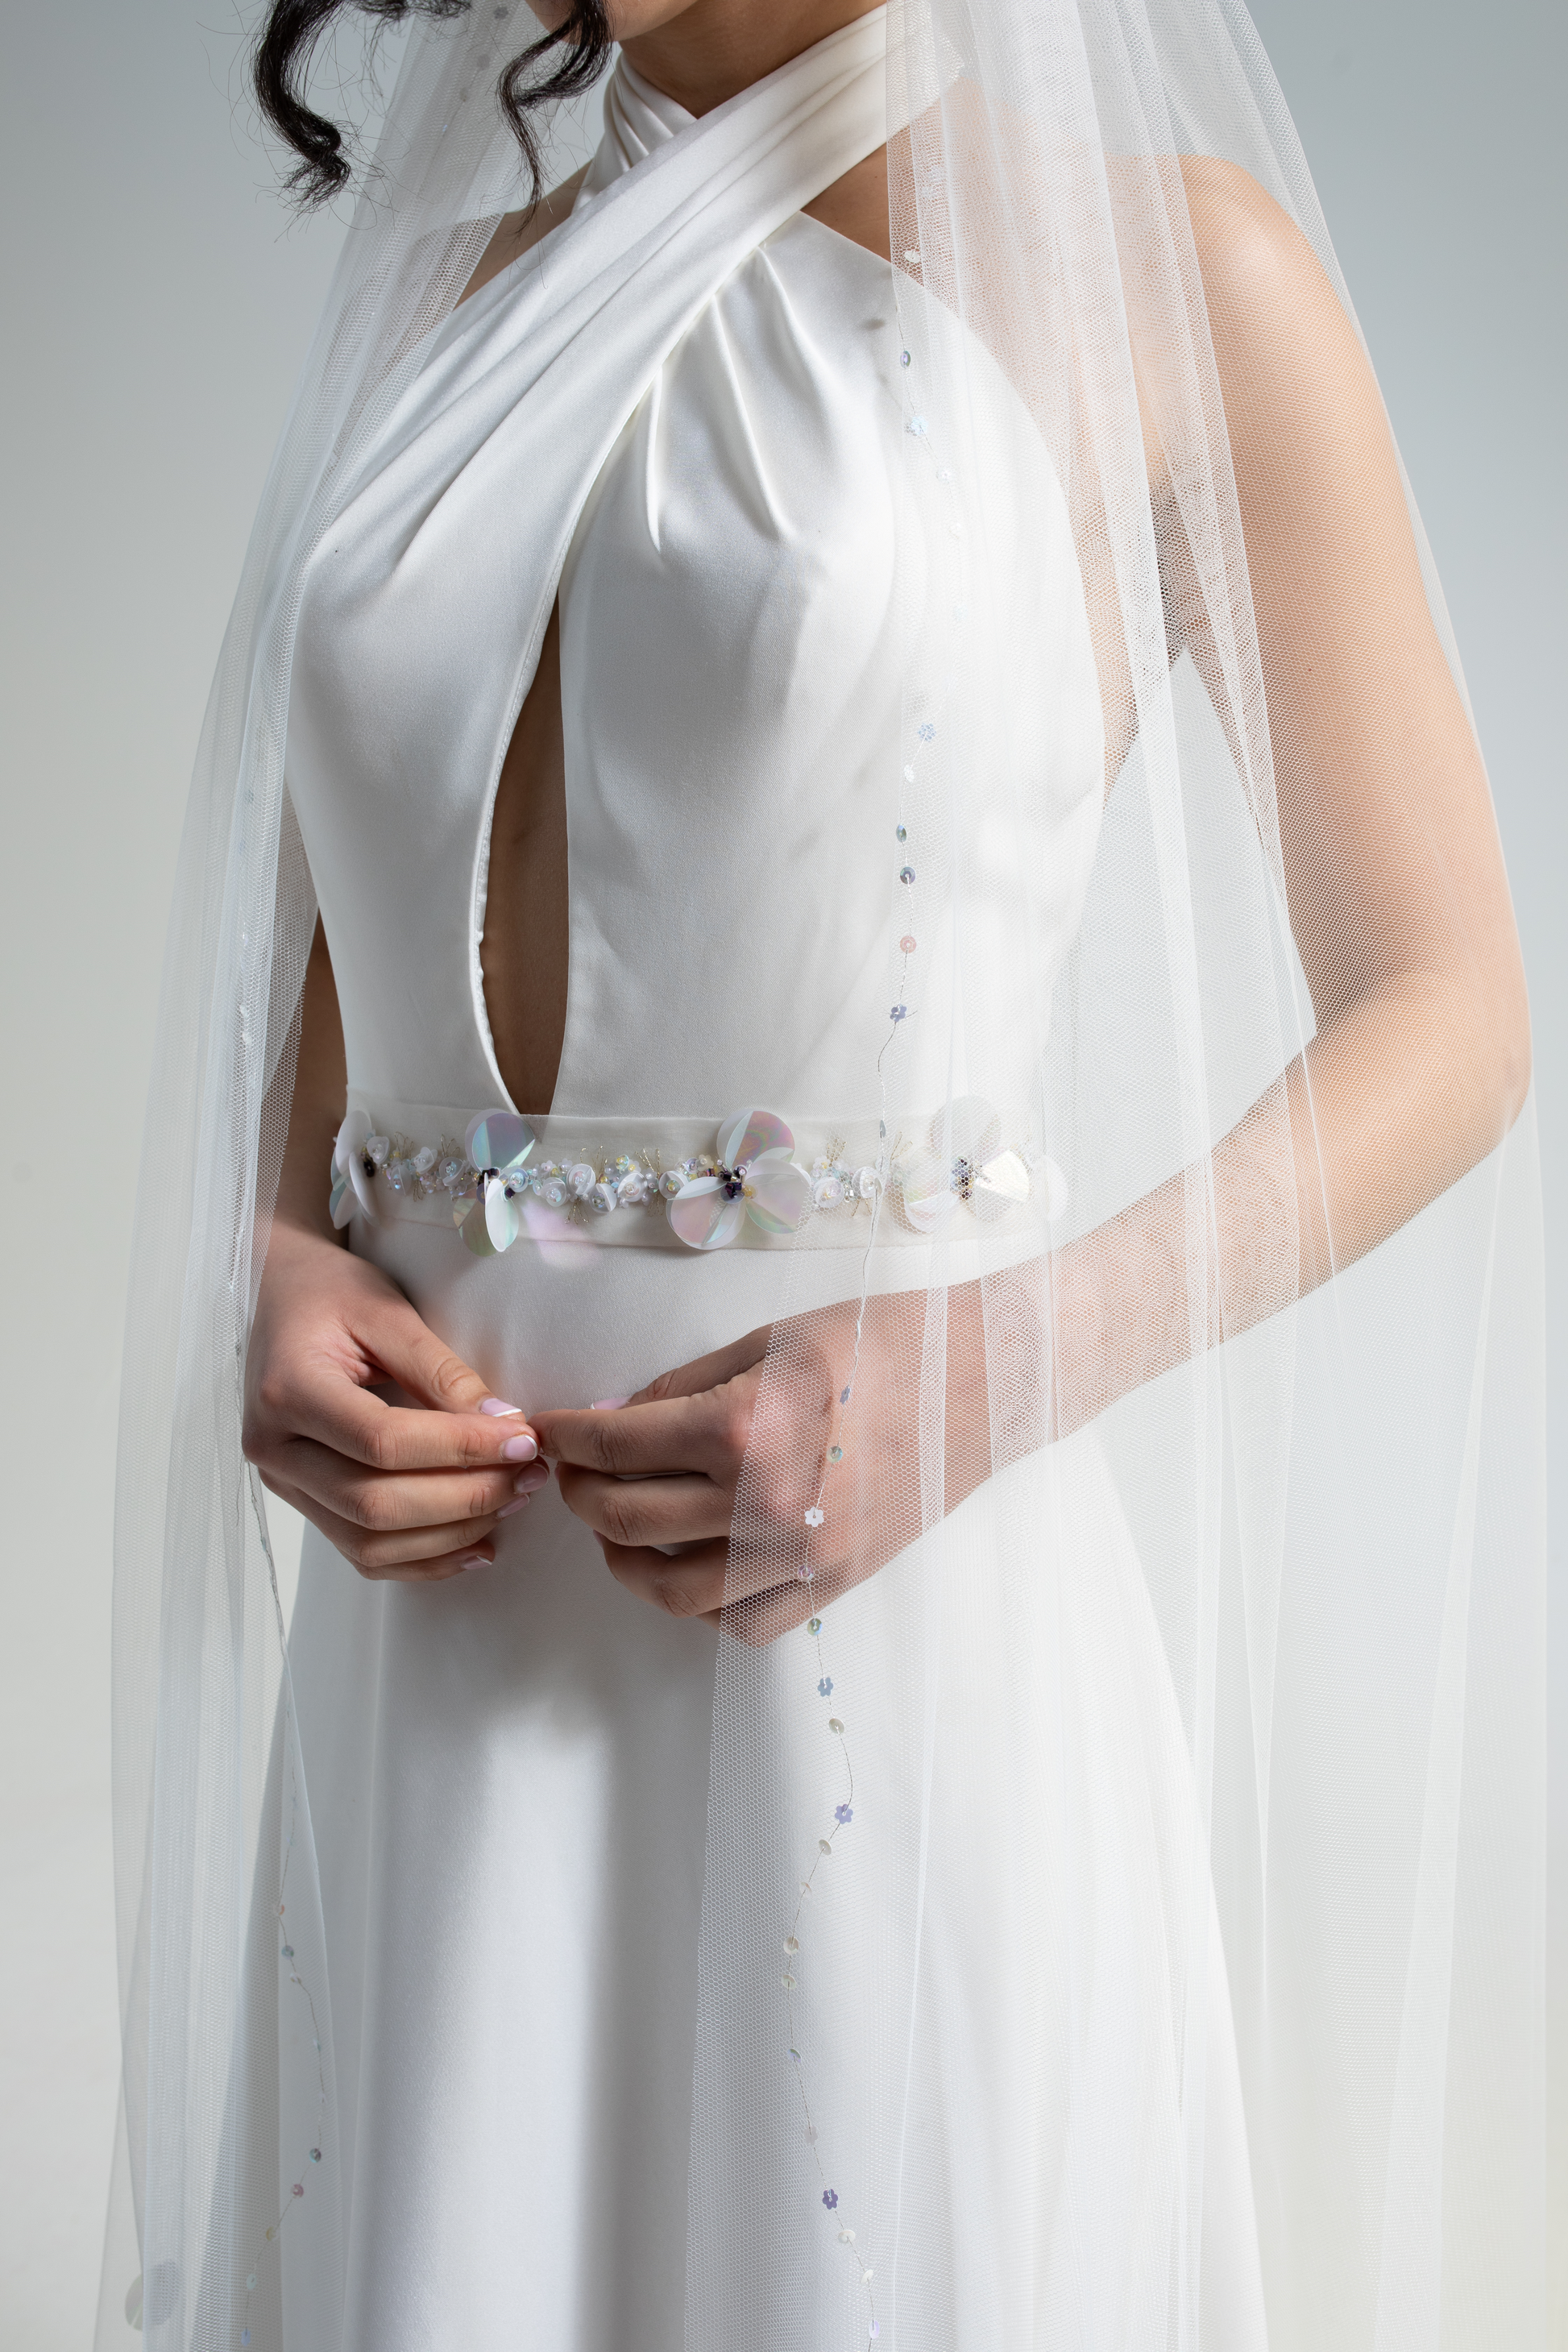 Hand-embroidered silk organza wedding belt decorated with hand-sewn sequins and beads in a floral design. This embellished bridal belt is part of a collection of luxury hand-made bridal accessories.